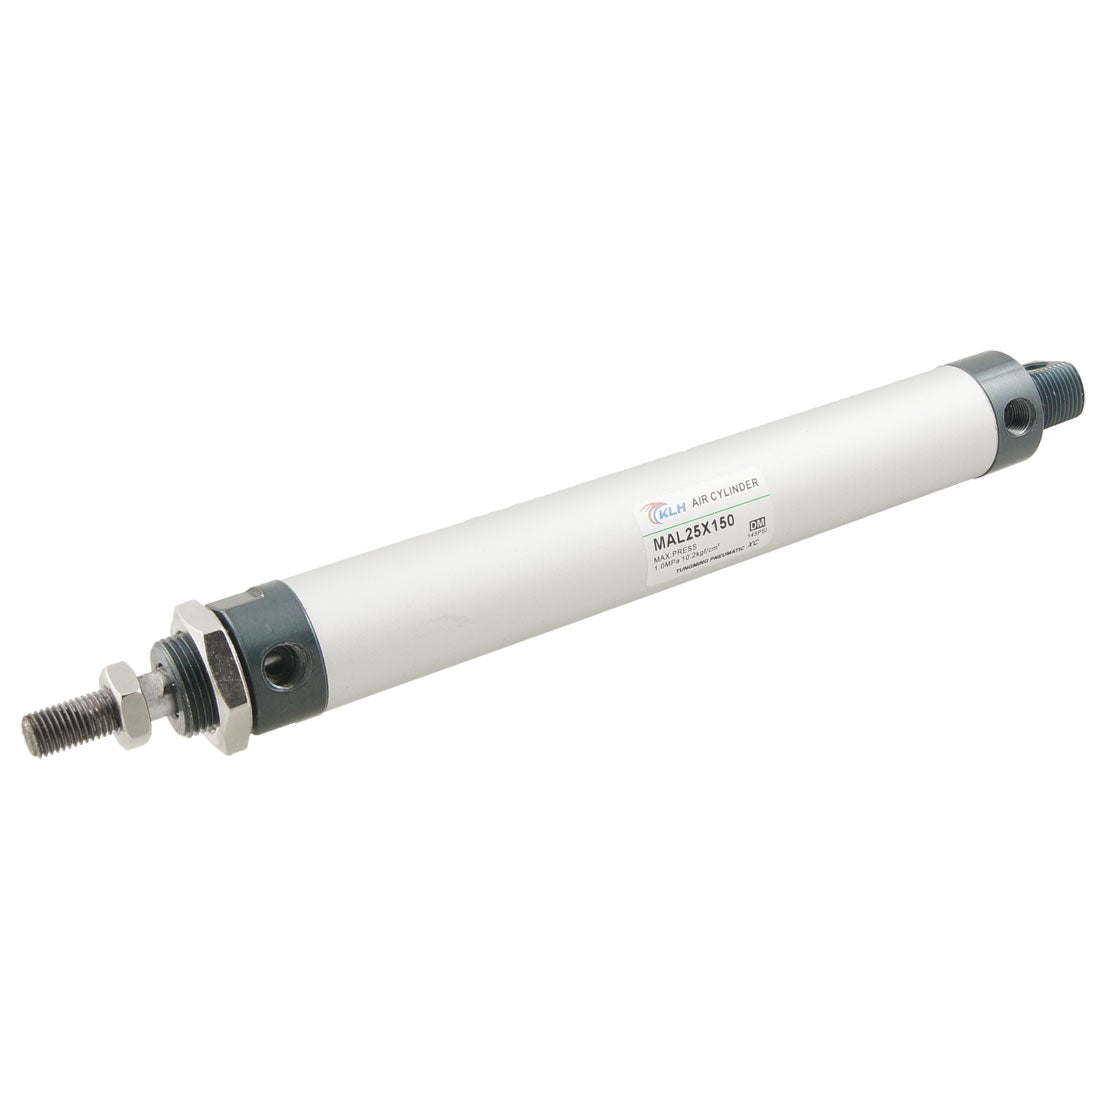 uxcell Uxcell MAL25x150 25mm Bore 150mm Stroke Single Rod Pneumatic Air Cylinder